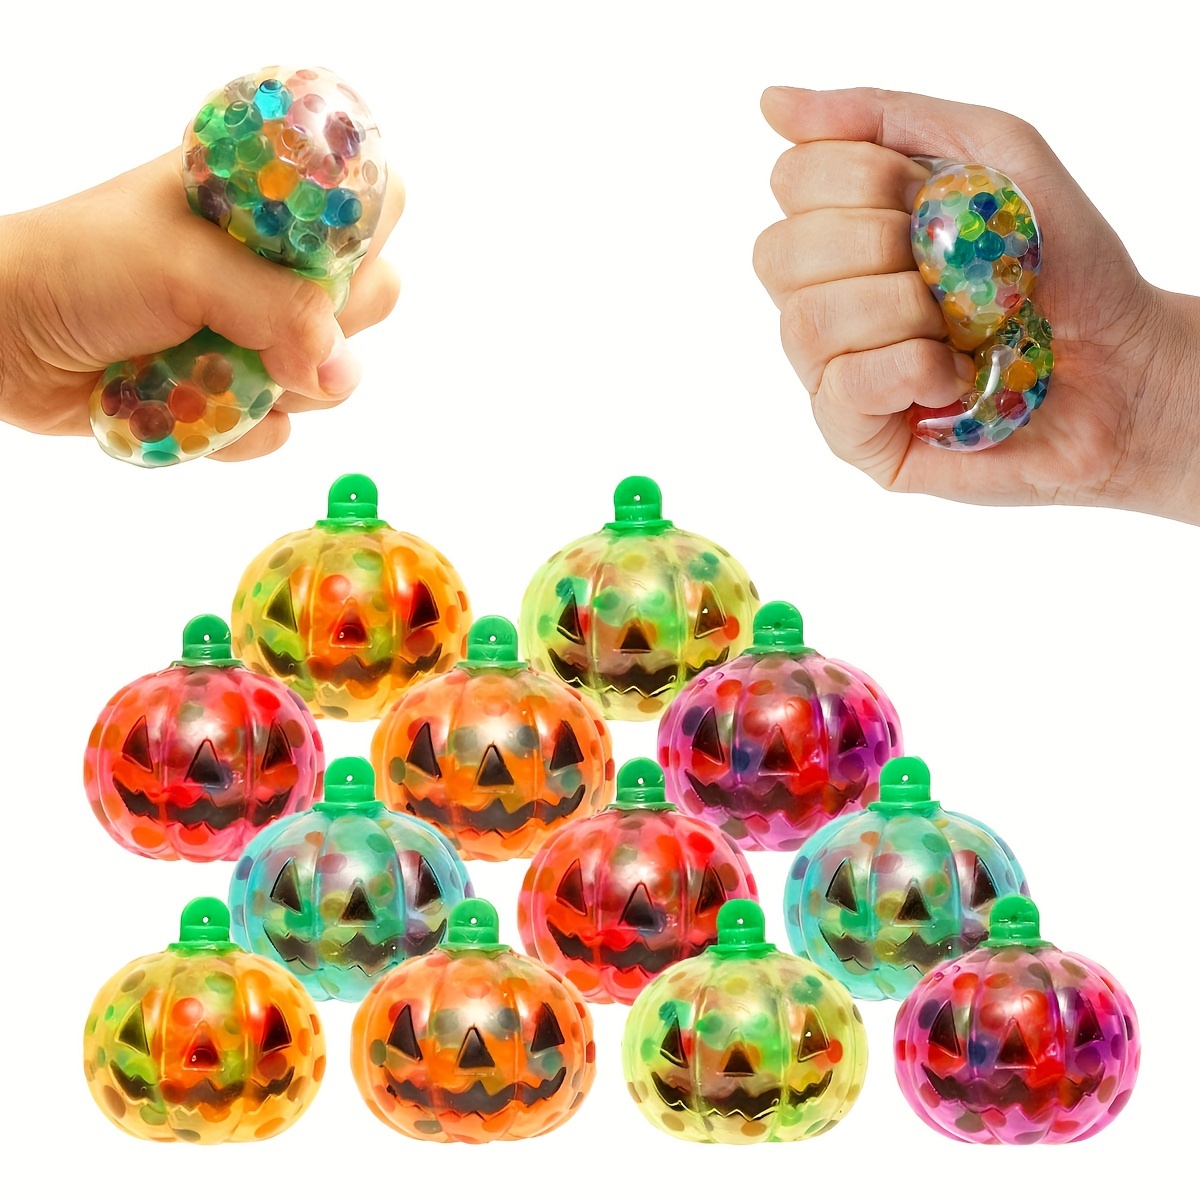 Christmas Mini Sensory Stress Ball Pack for Christmas Party Favors, Squeeze  Toy with Water Beads to Stress Reliever,Christmas Stocking Stuffers